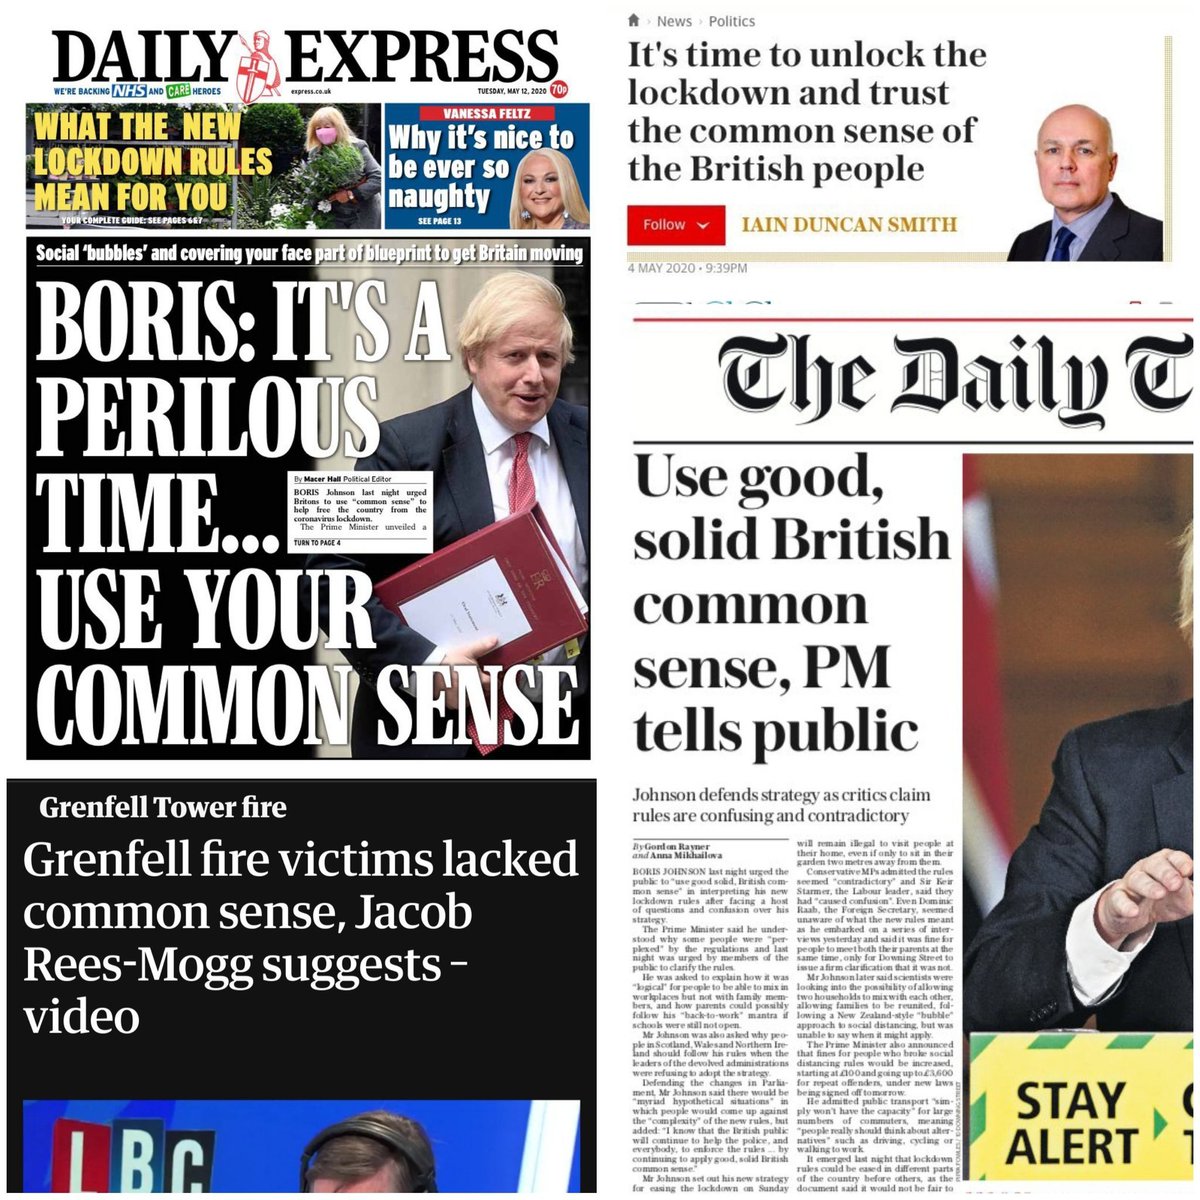 The latest salvo in the "common sense" bullshit-get-out-clause, which the Tories always mobilise to avoid taking responsibility or being held accountable.The last time Boris Johnson spouted this shit & it was splashed on the front pages was in may 2020, & that went REALLY well.